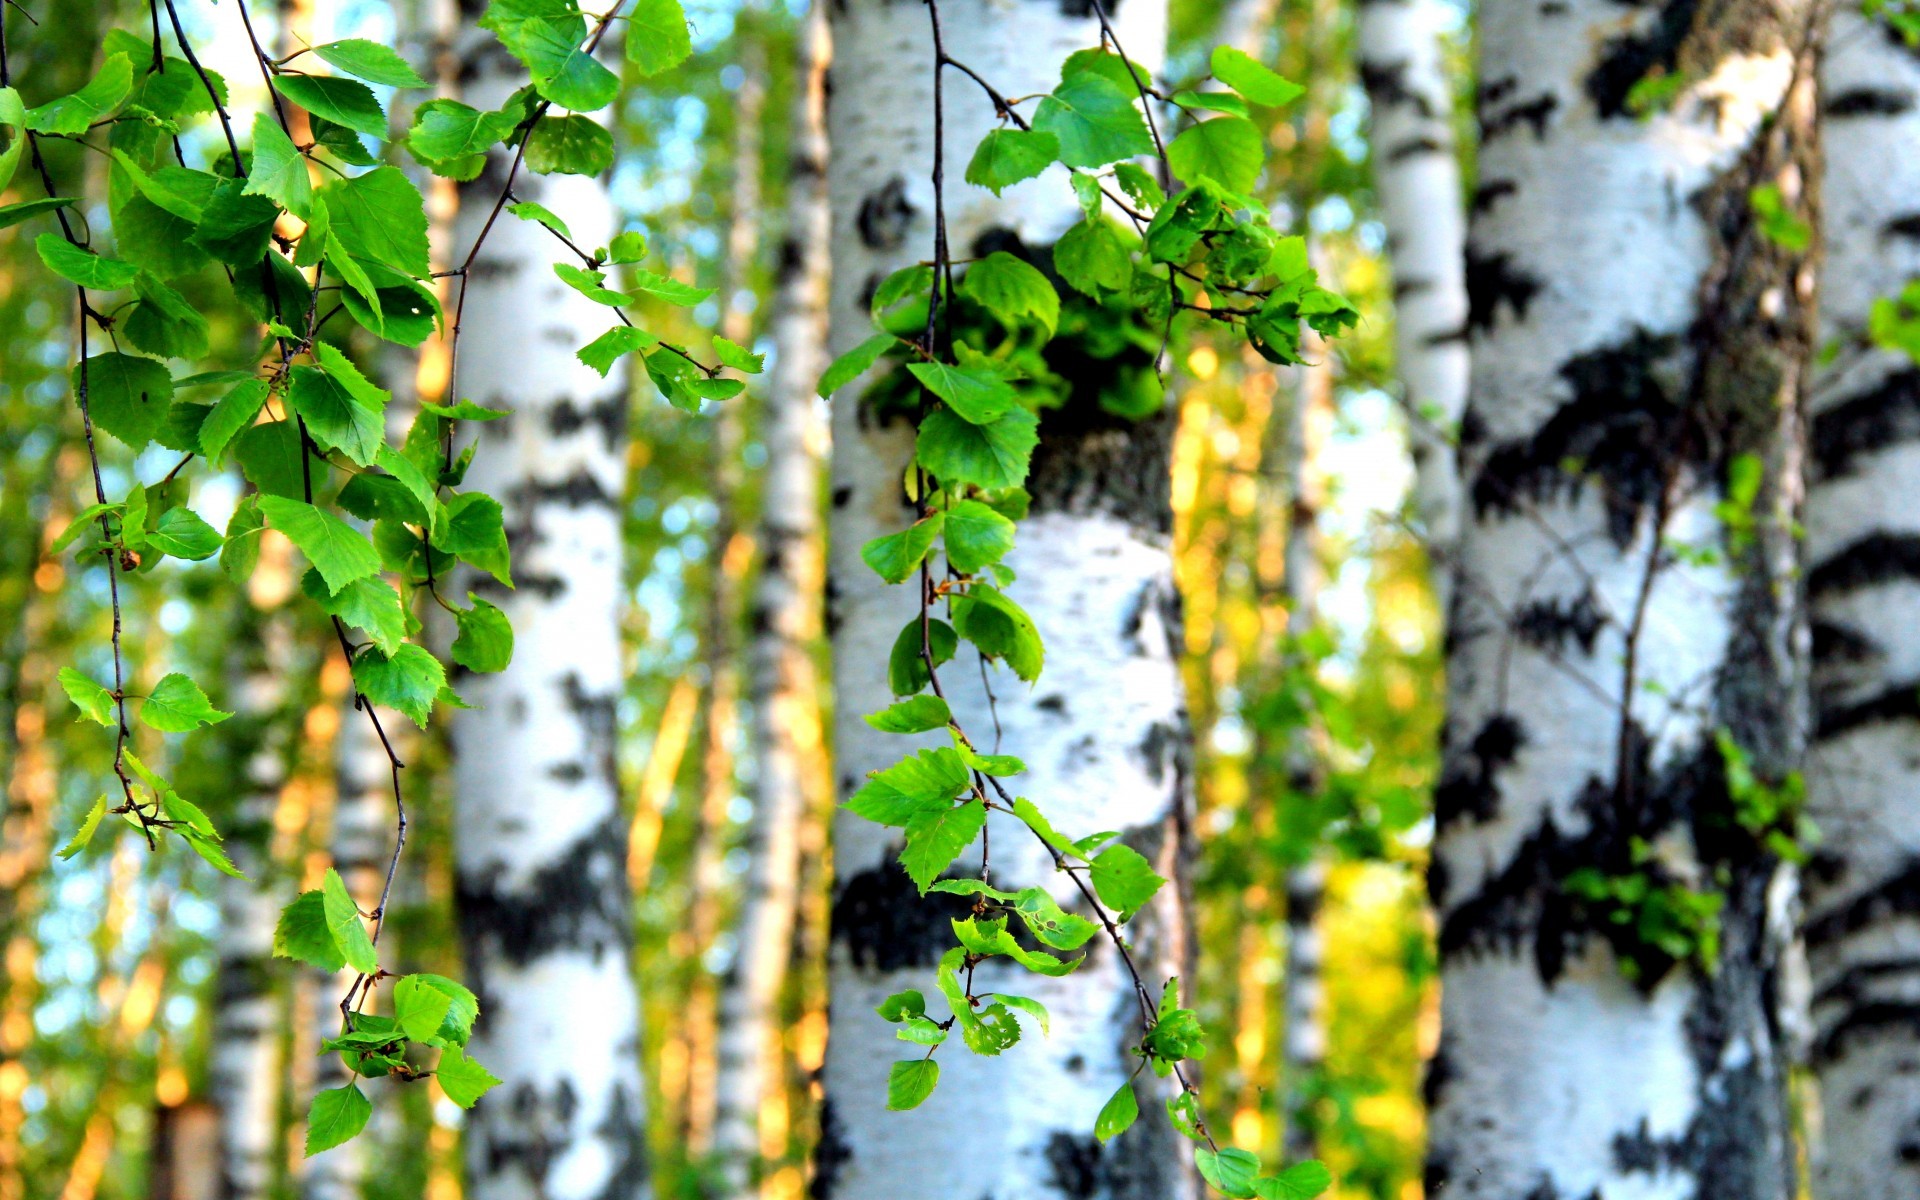 General 1920x1200 nature trees leaves plants birch forest sunlight summer vibrant